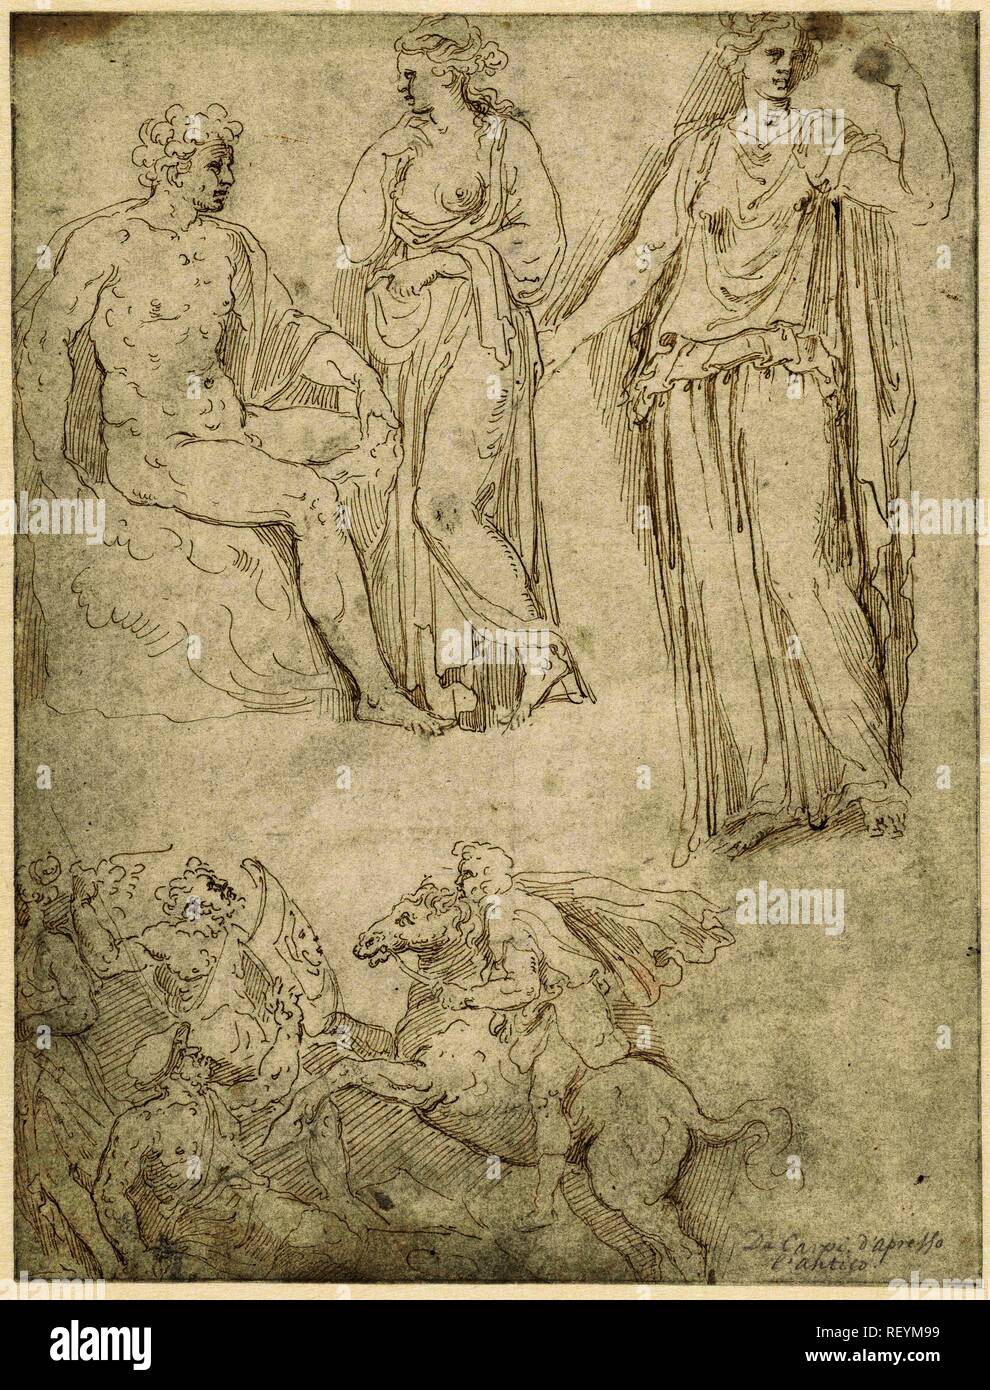 Man and woman, woman and face and rider attacking foot soldiers. Draughtsman: Girolamo da Carpi (follower of). Dating: 1530 - 1600. Measurements: h 260 mm × w 199 mm. Museum: Rijksmuseum, Amsterdam. Stock Photo